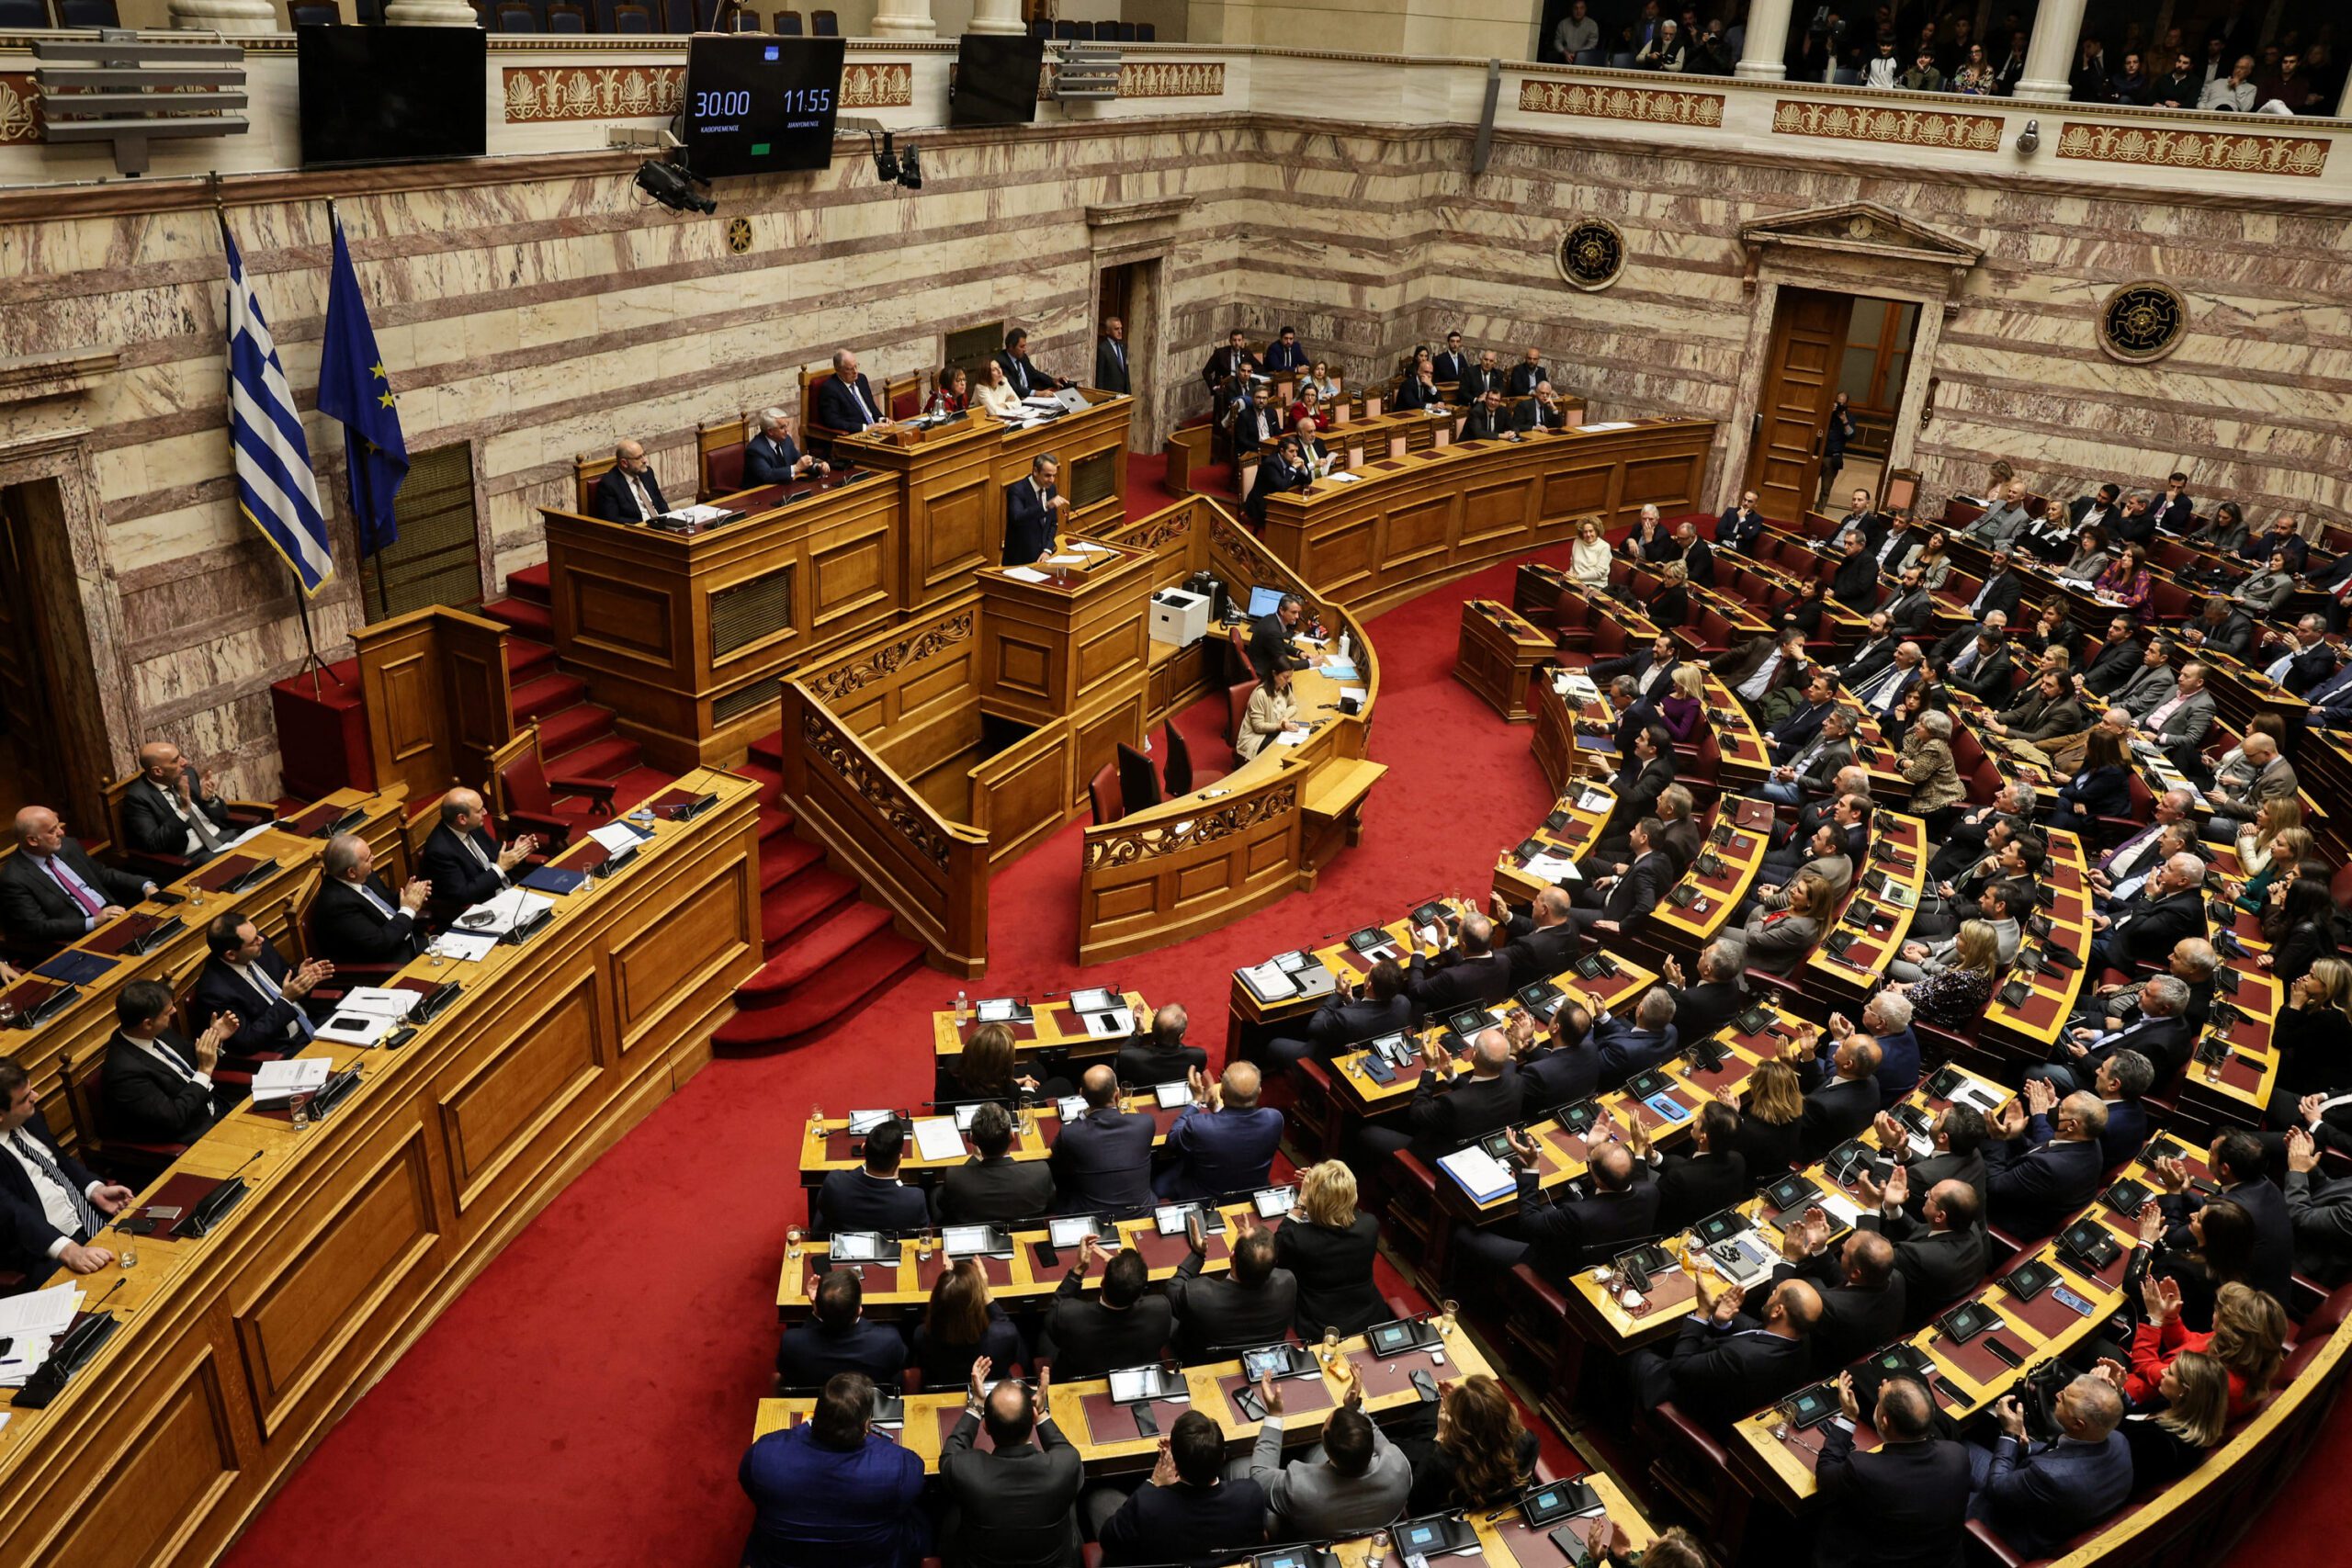 Parliament meeting in Athens Greece